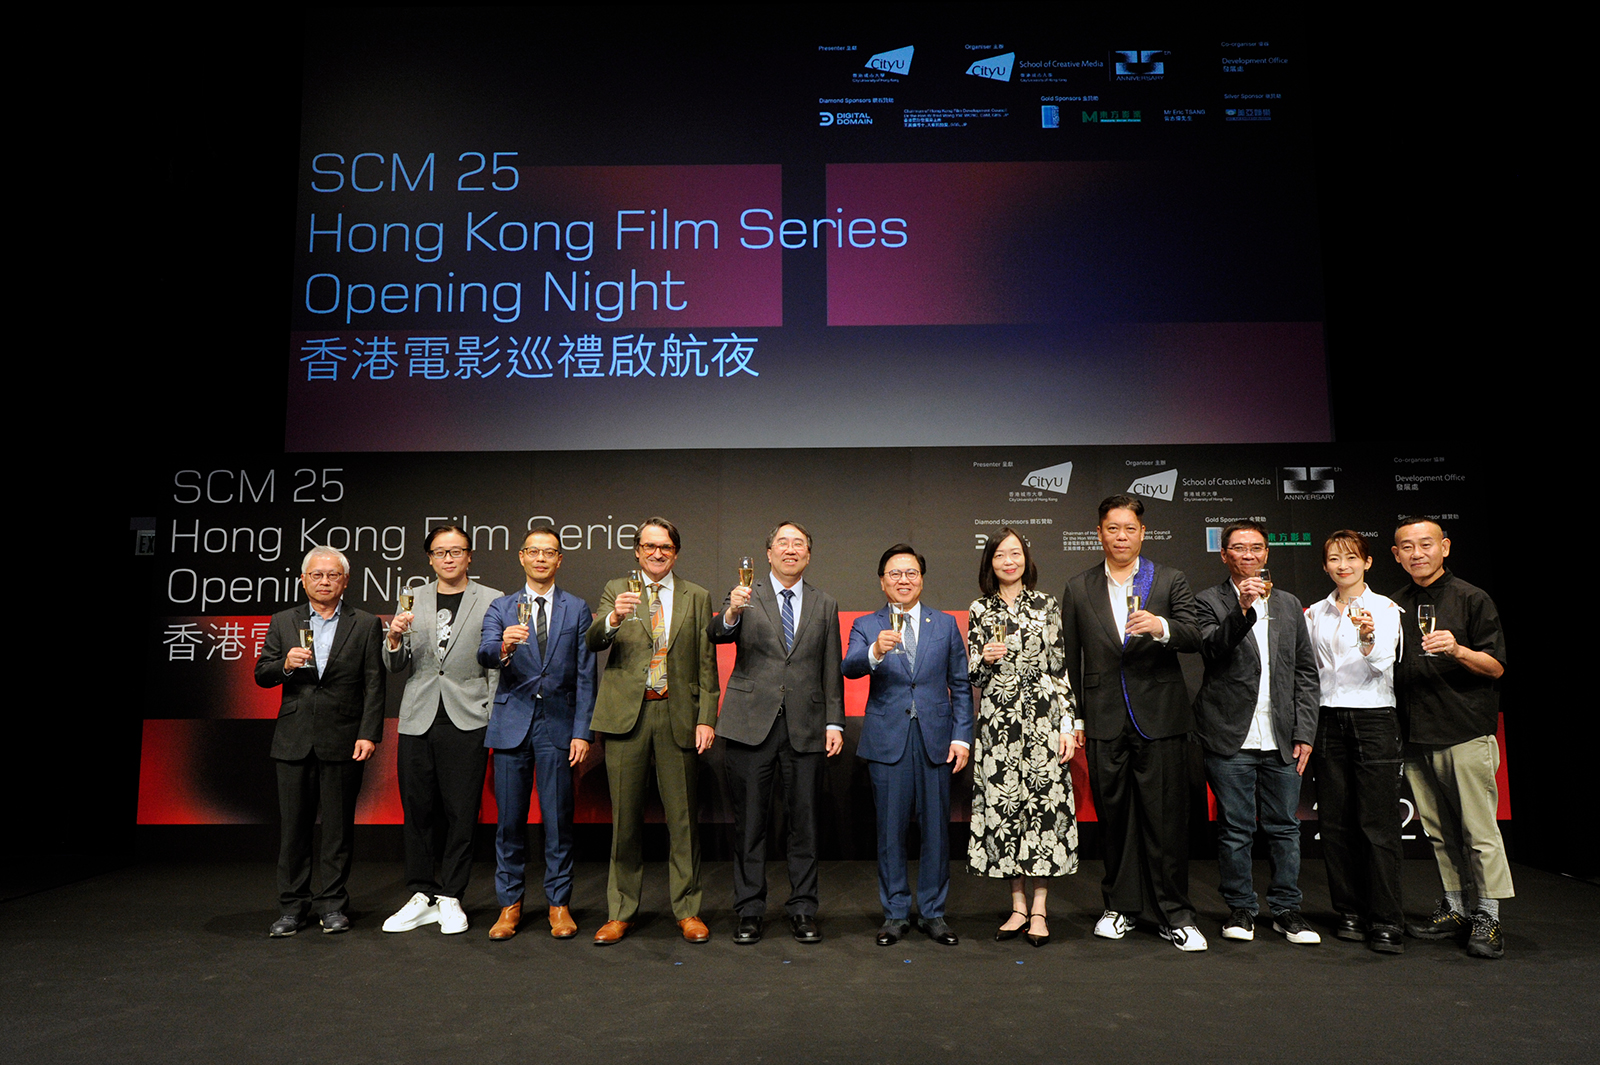 (From left) Mr Patrick Tong, Mr Edmond Wong, Mr William Wong,  Professor Richard Allen, Professor Lee Chun-sing, Dr the Hon Wilfred Wong, Ms Kathy Chan, Mr Angus Chan, Professor Stanley Kwan, Ms Catherine Chau Ka-yee and Mr Bowie Lam Po-yee.